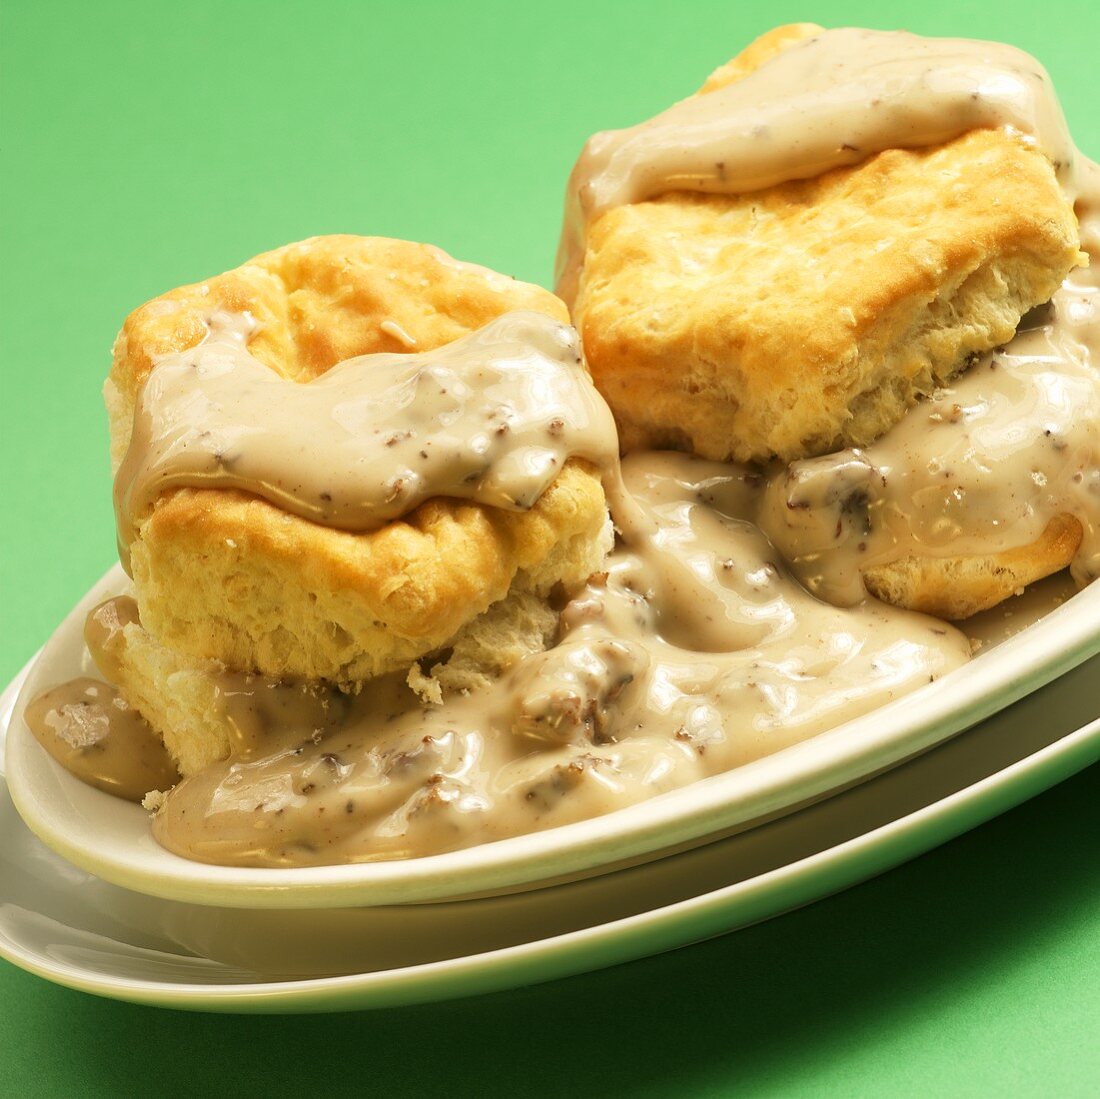 Two Biscuits with Sausage Gravy